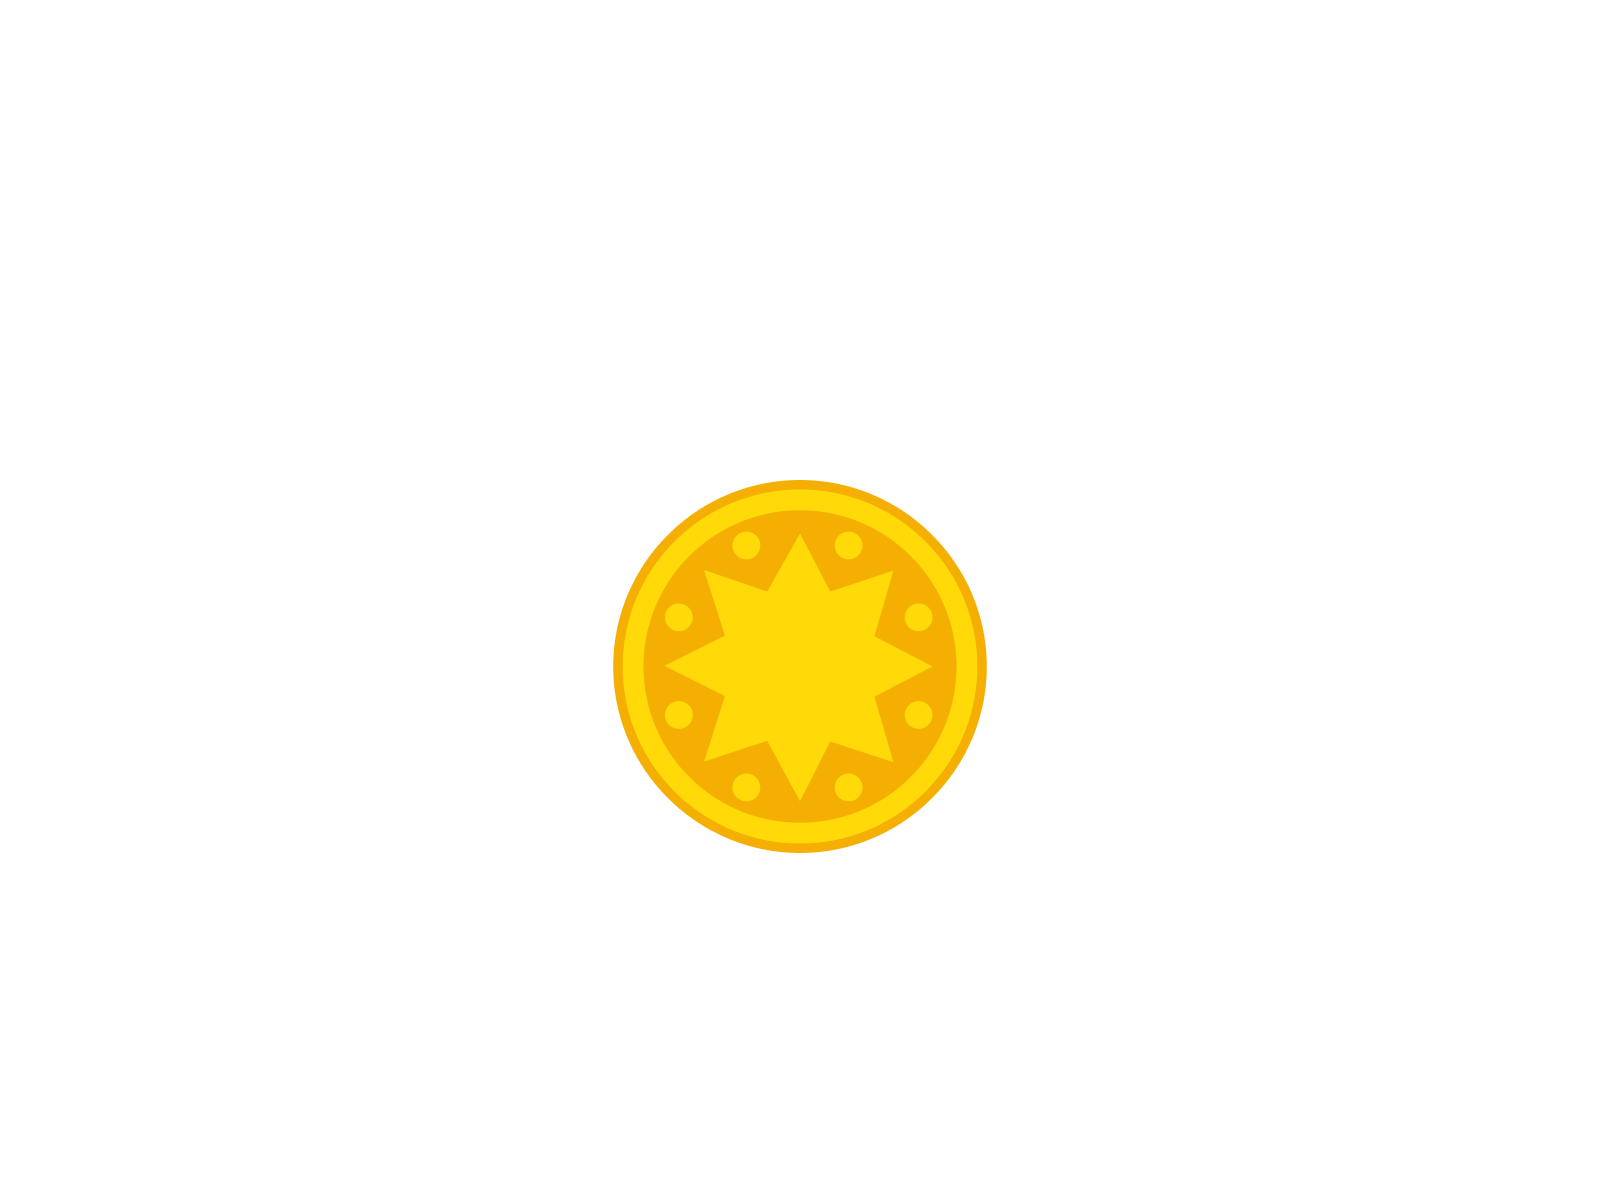 Coin Loading 2d animation coin flat flipping gif gold icon illustration loading loop money rotating vector